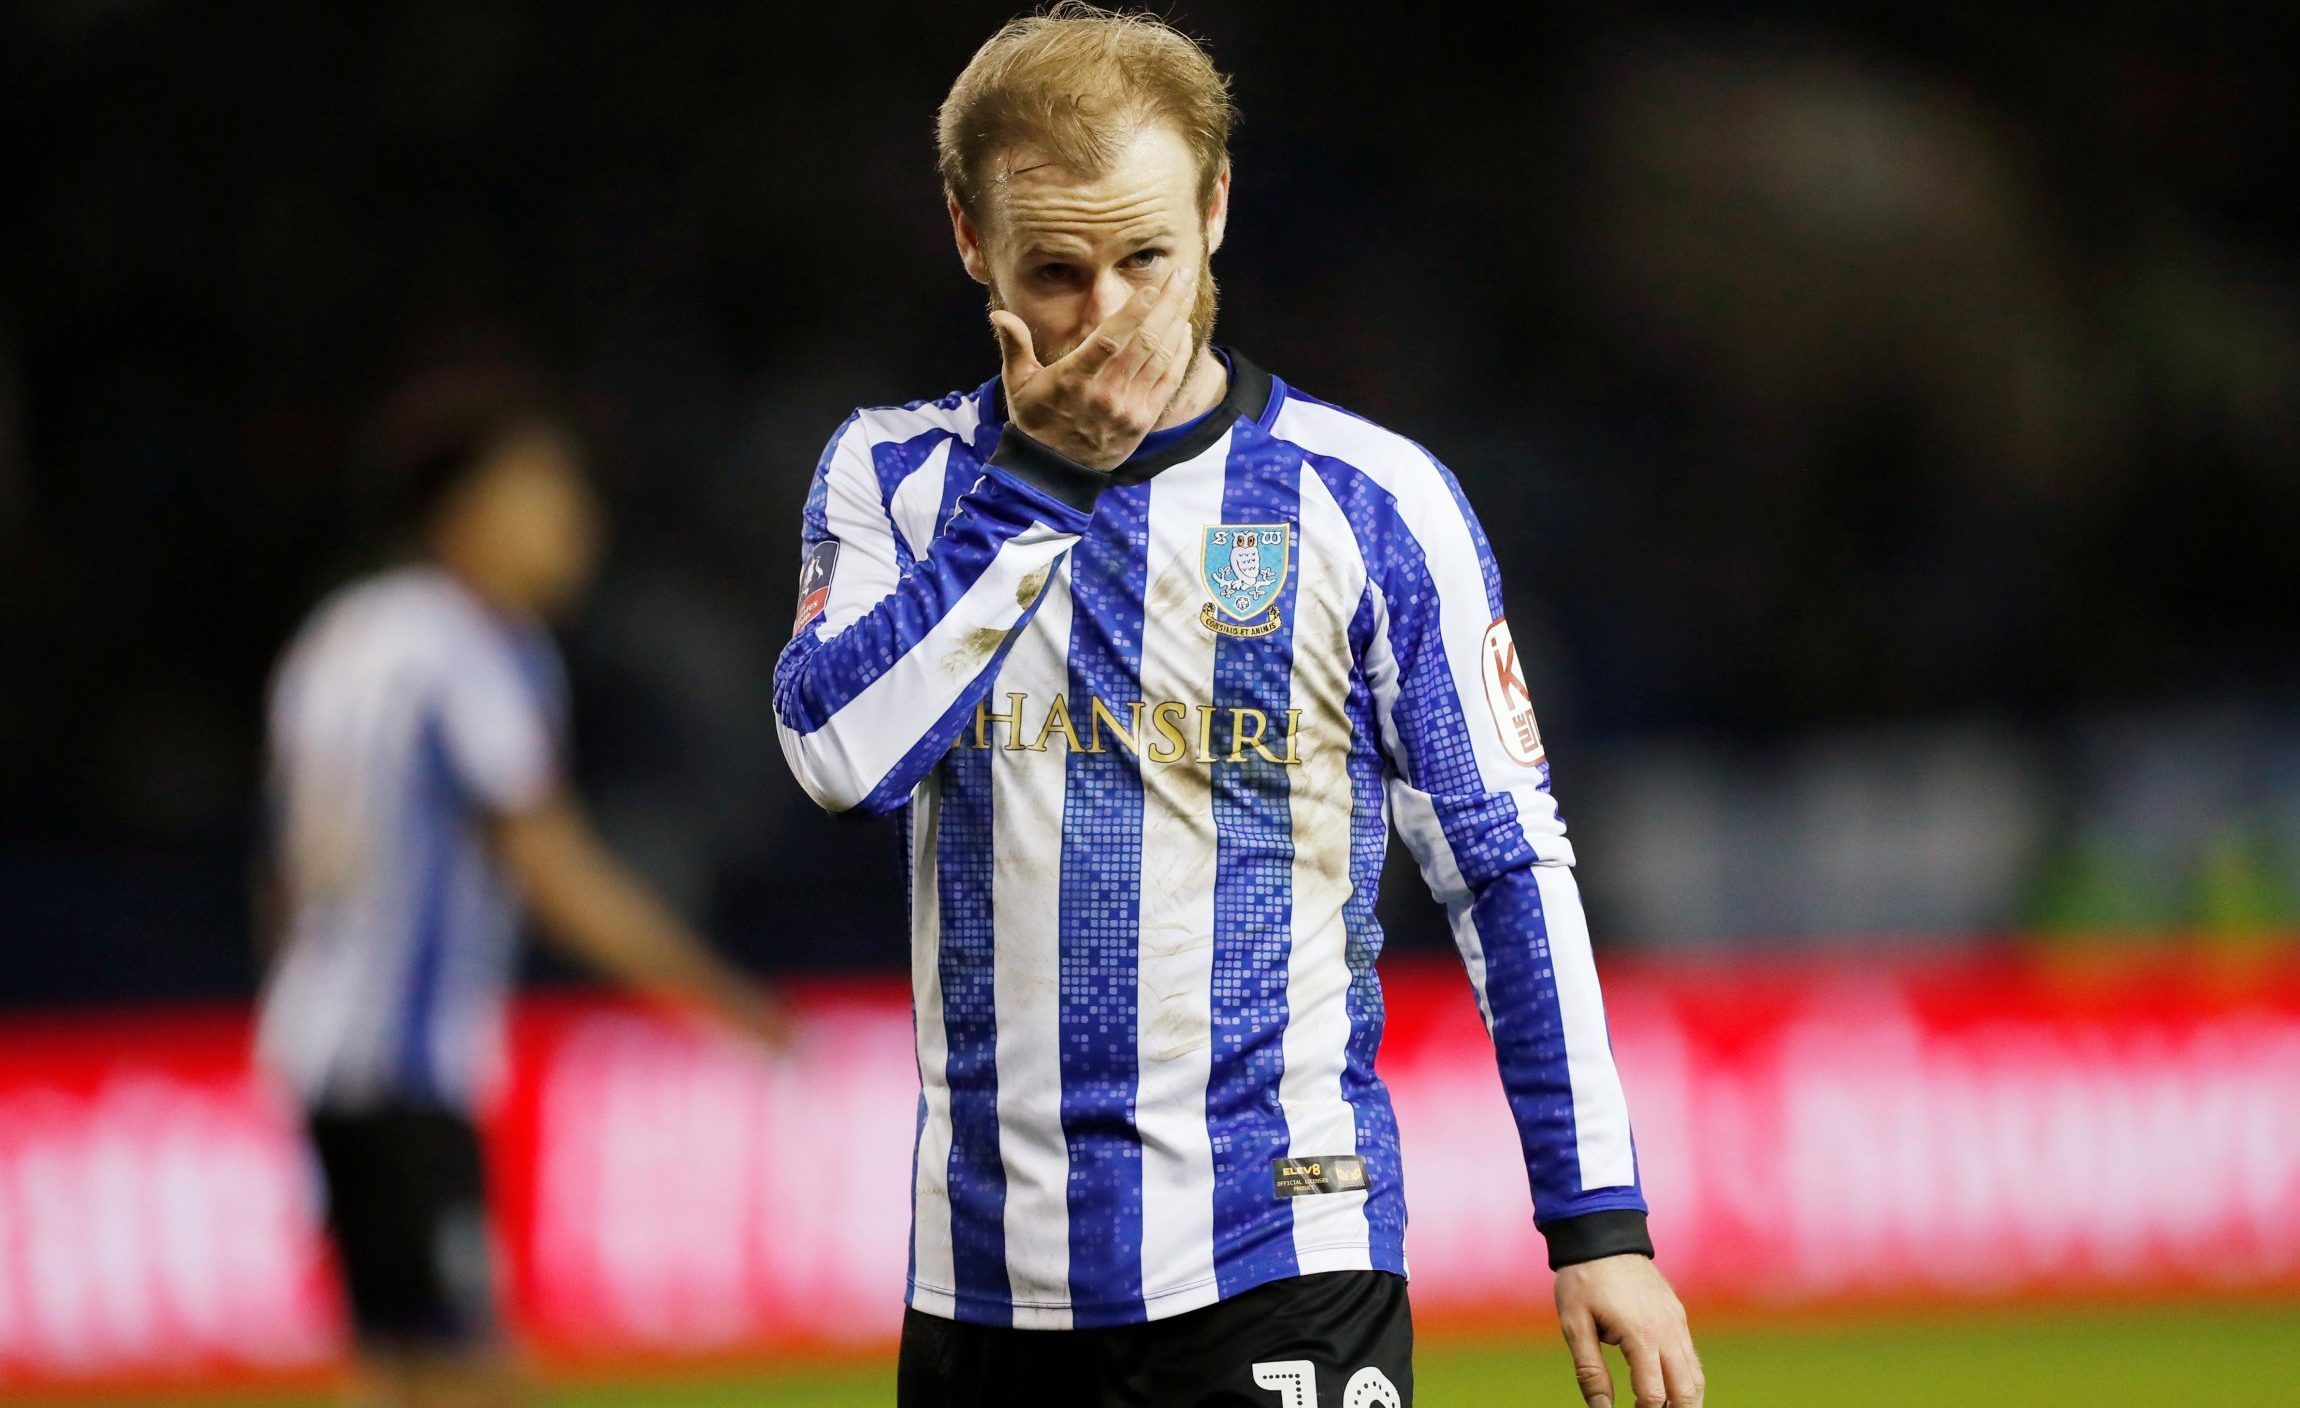 sheffield wednesday midfielder and captain barry bannan looks on